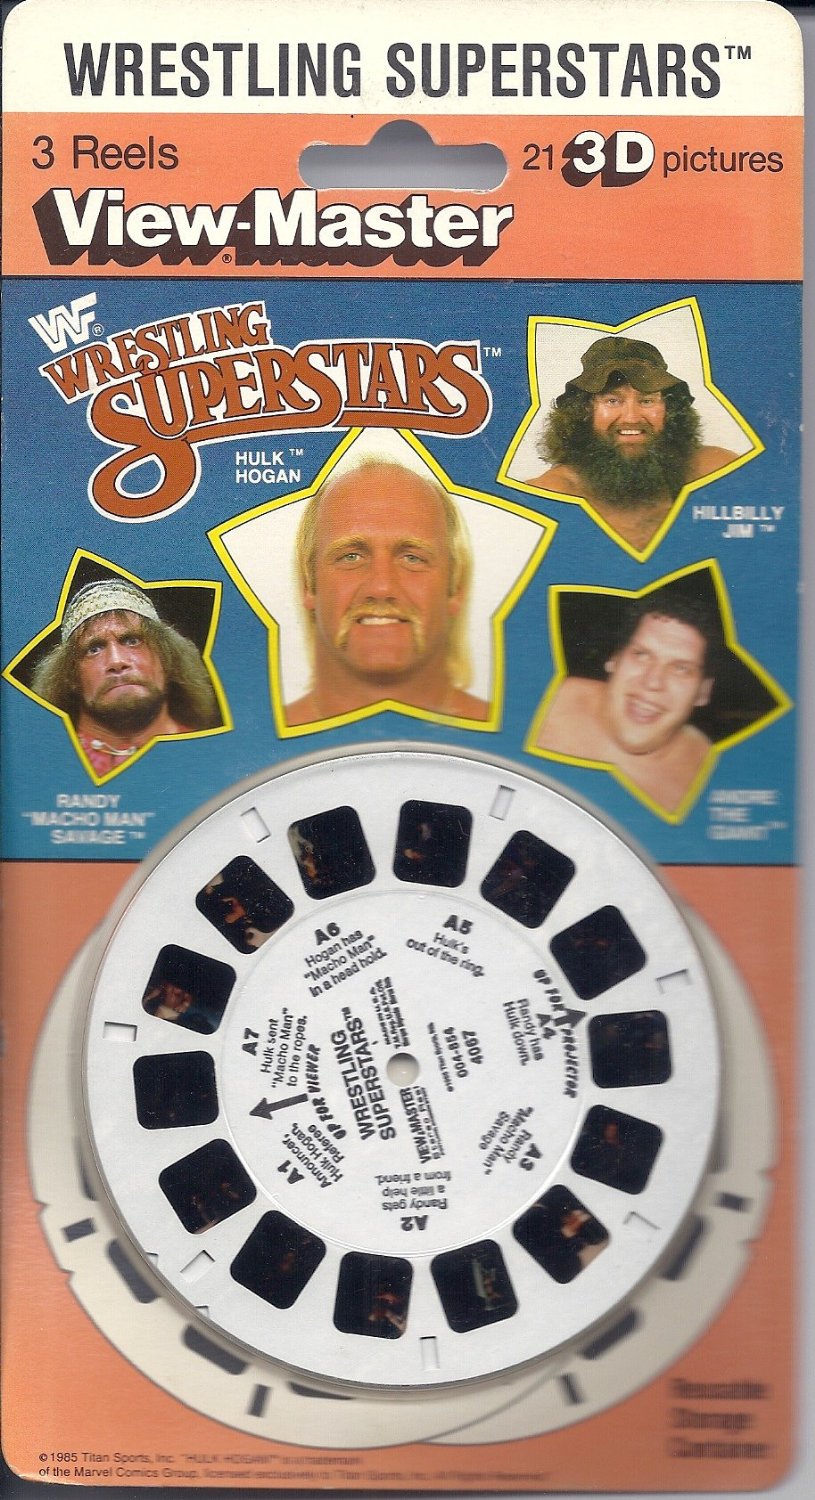 WWF View-Master reels in box